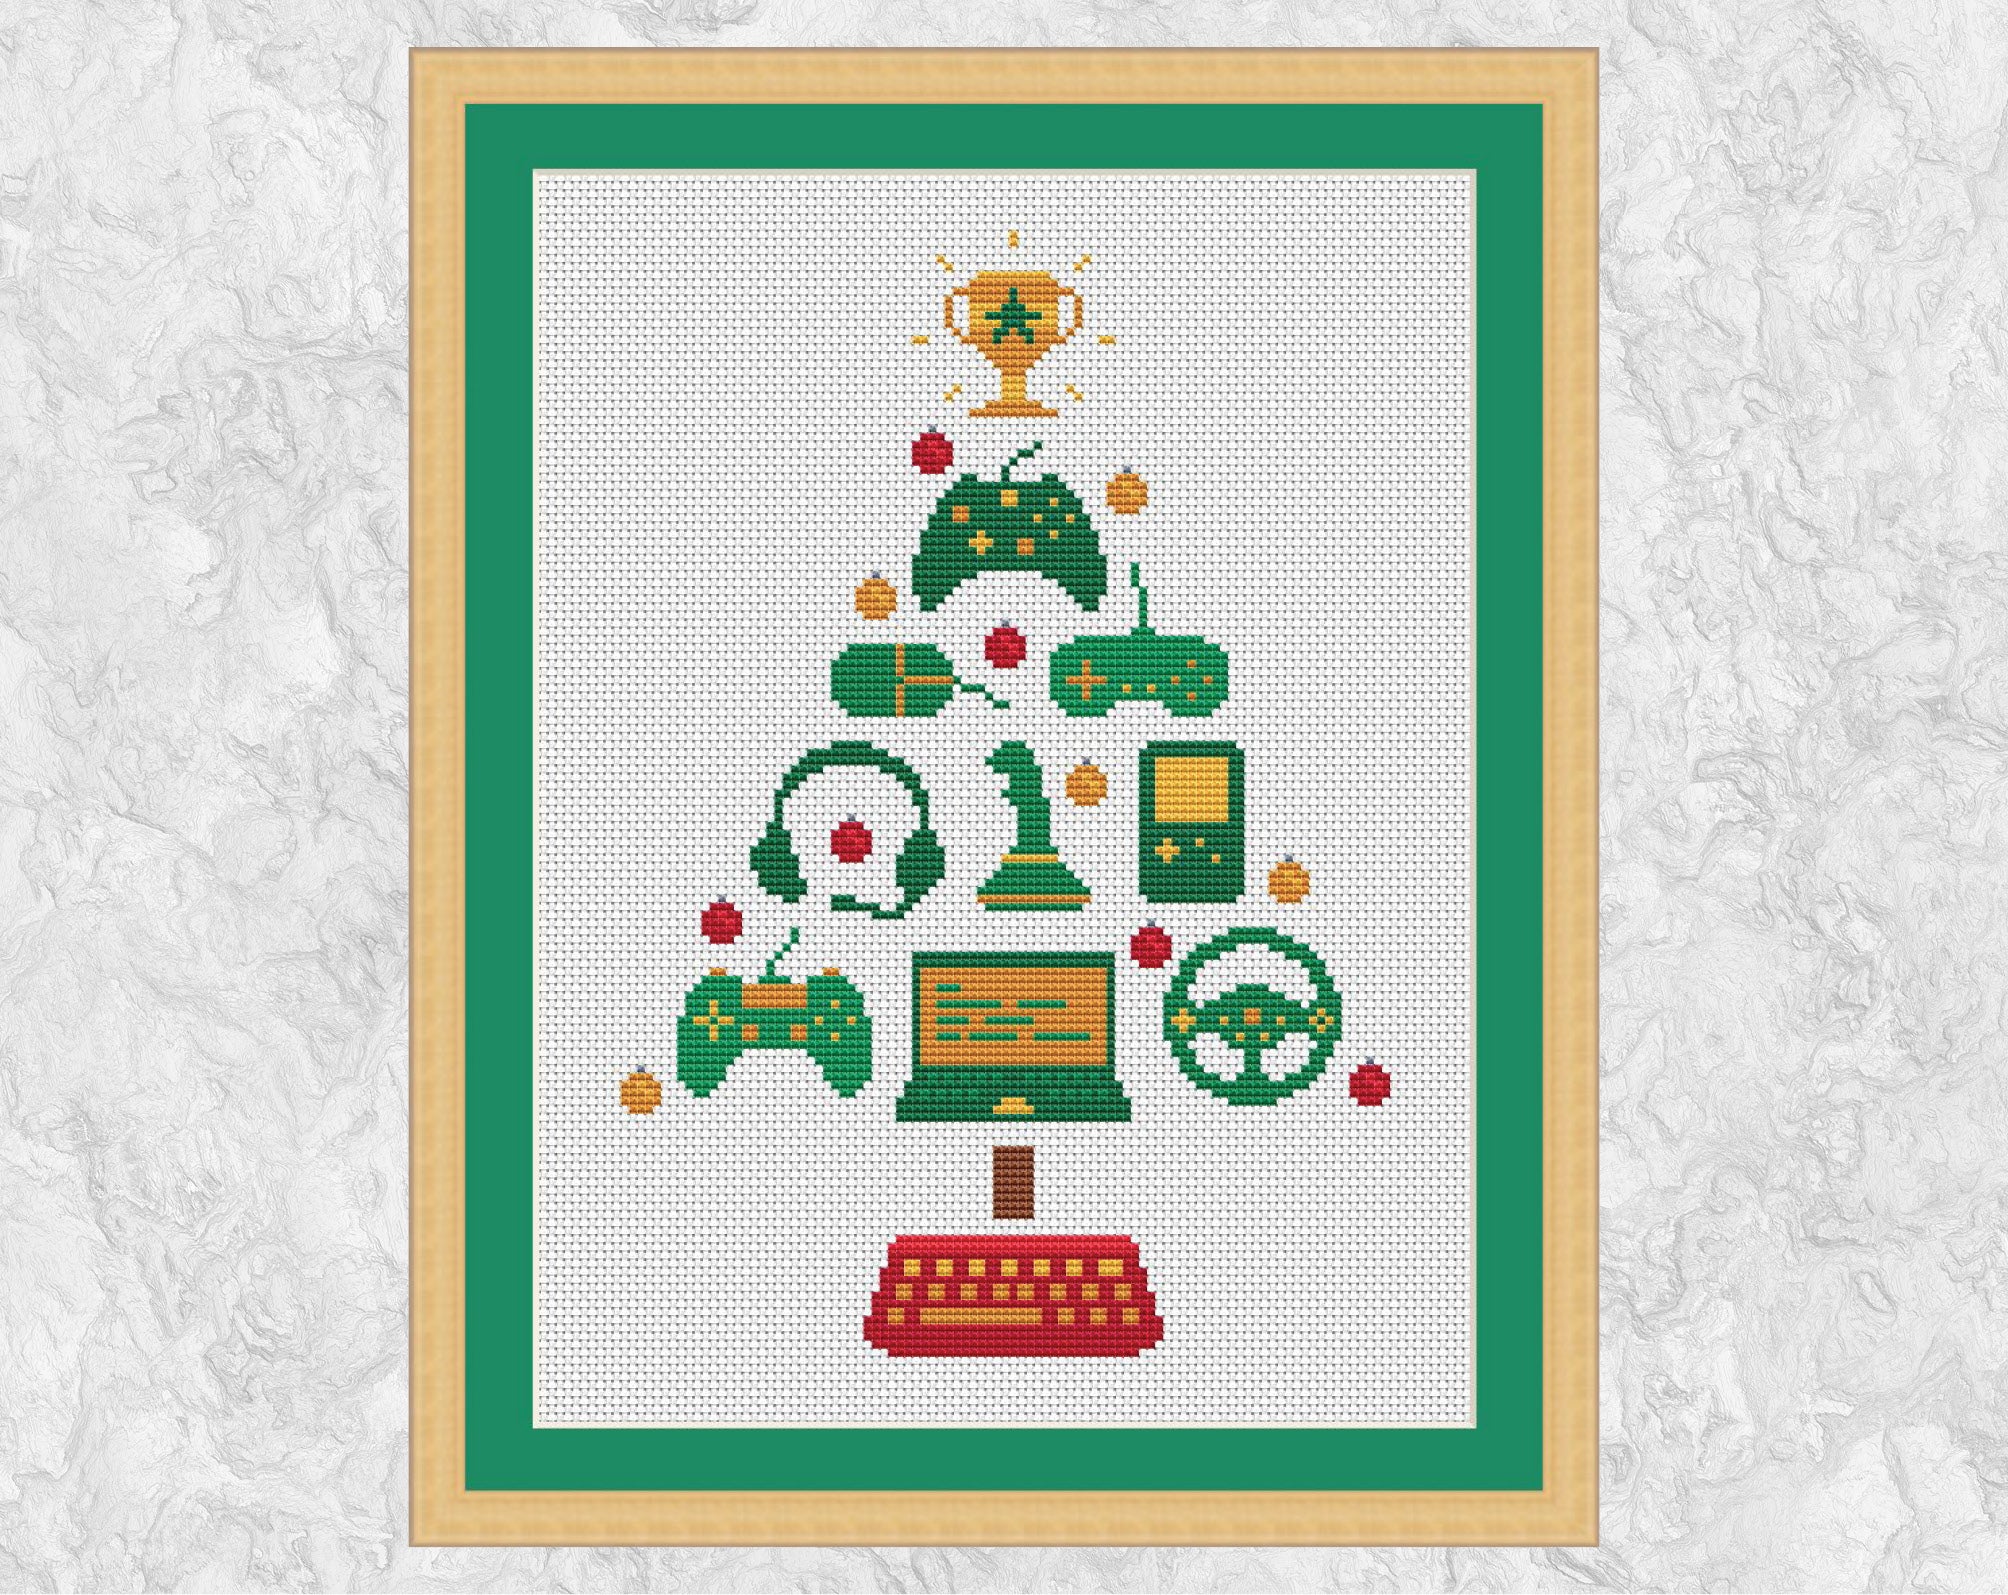 Computer Gamers' Christmas Tree cross stitch pattern. The tree features three consoles, a mouse, a joystick, a handheld game, a game driving wheel, a laptop and baubles, and a keyboard forms the pot. Shown with frame.